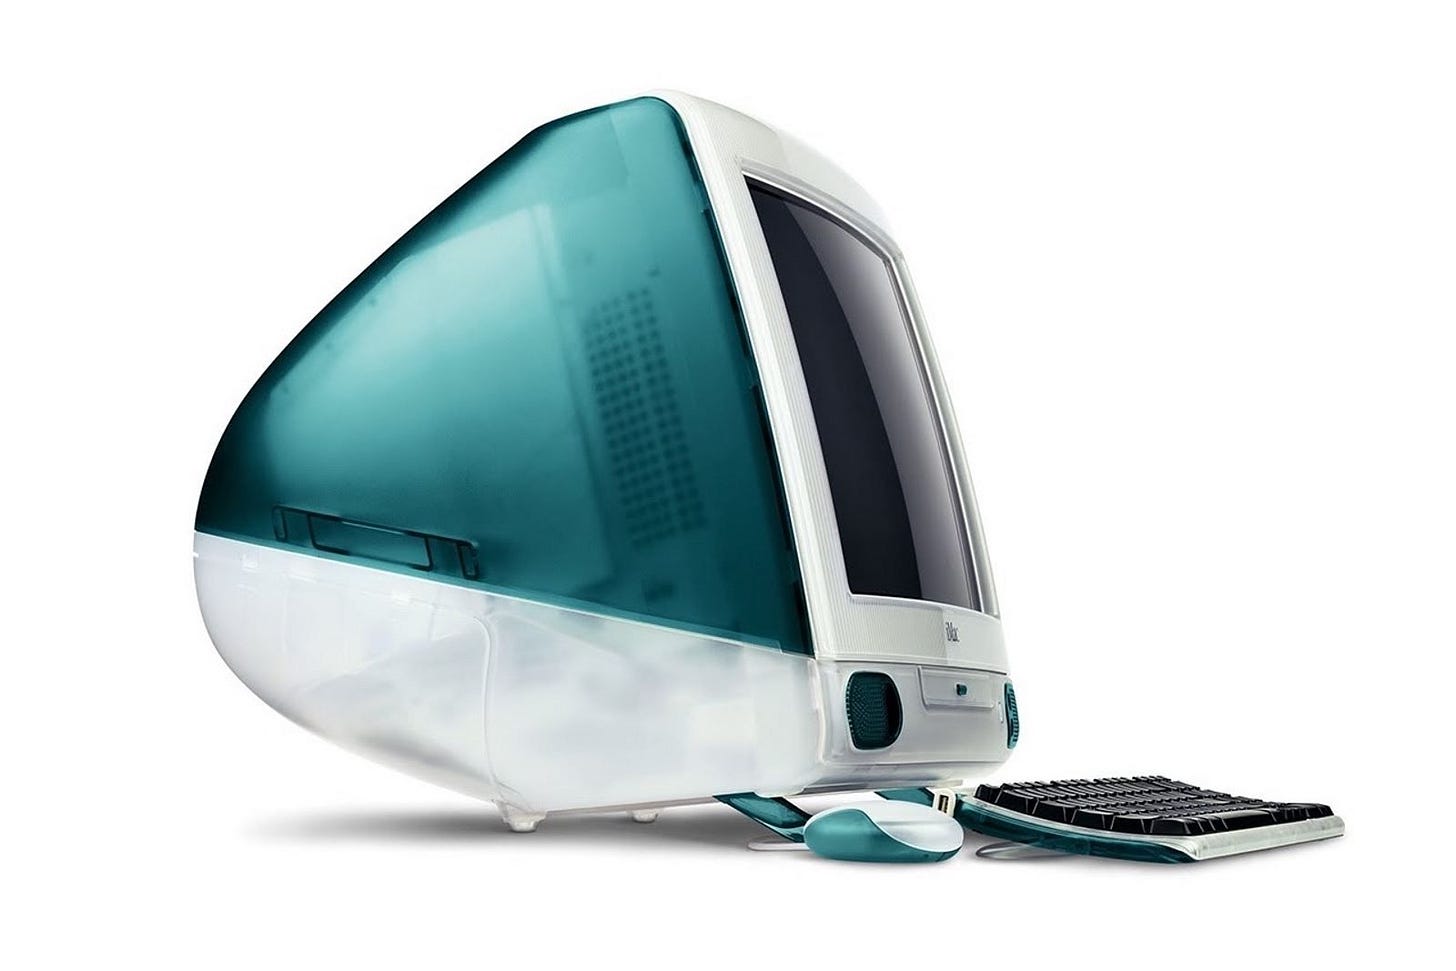 24 years of the iMac: looking back at Apple's legendary iMac G3